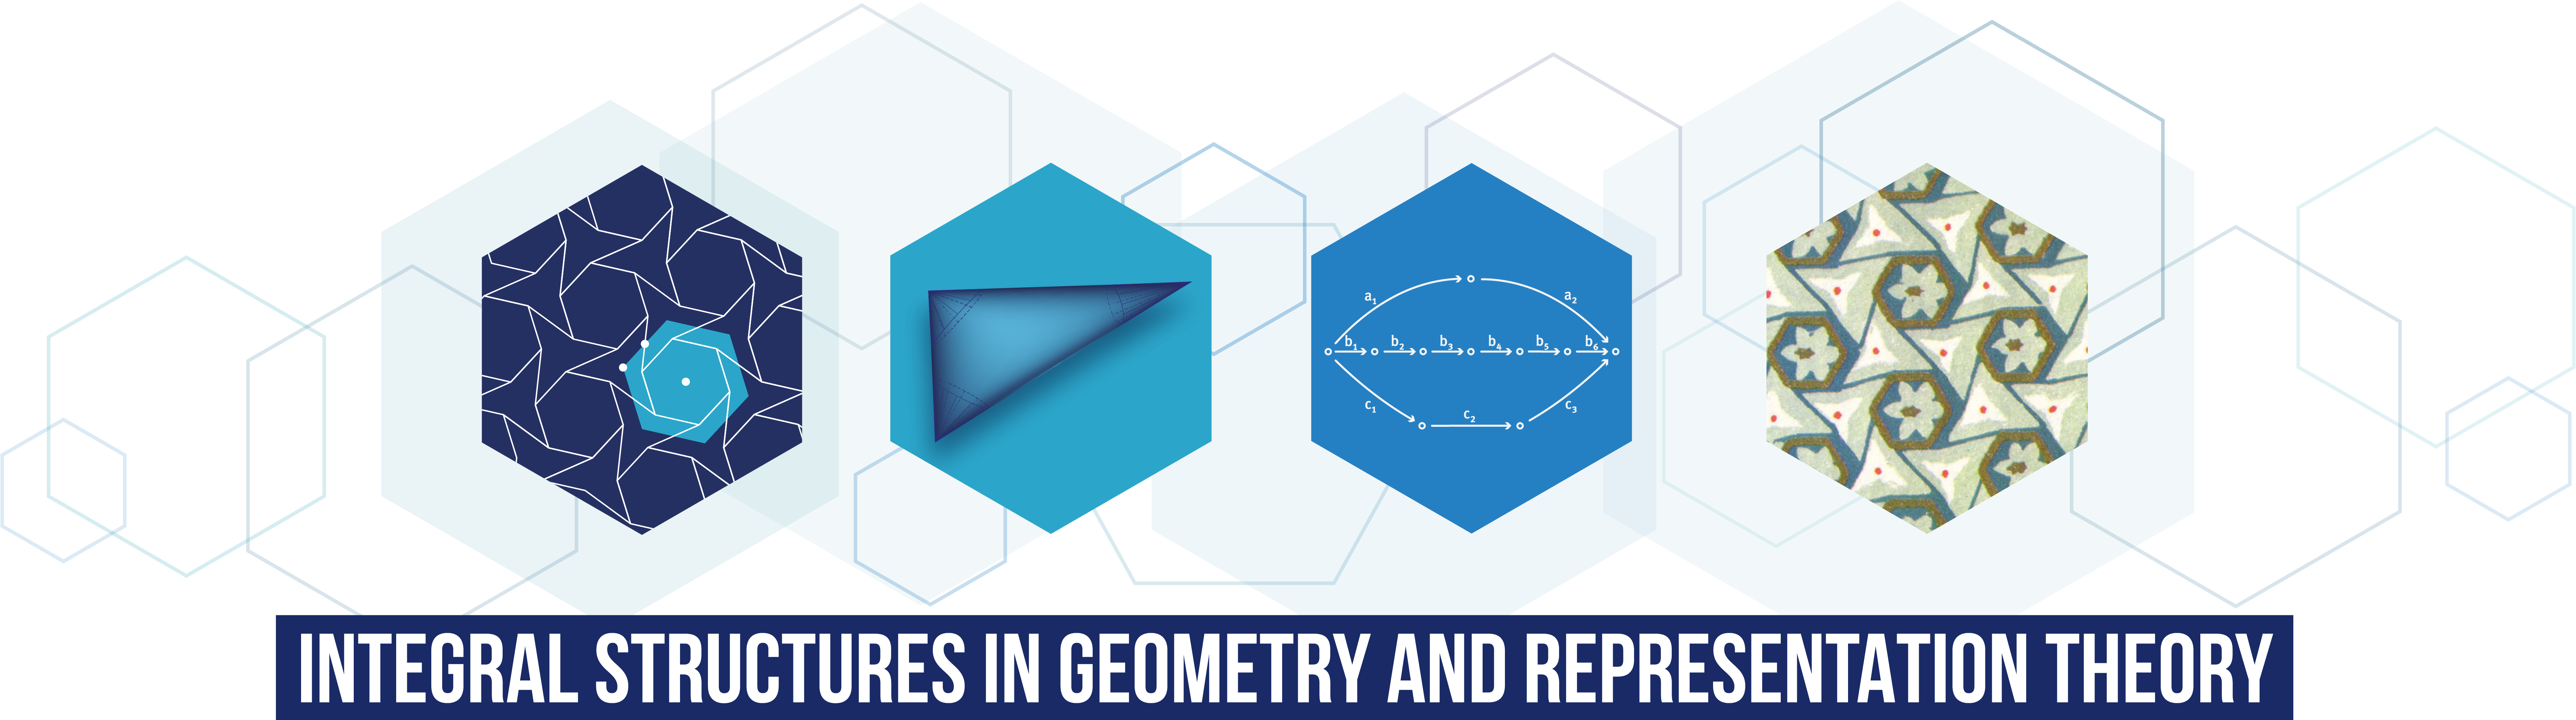 Integral Structures in Geometry and Representation Theory